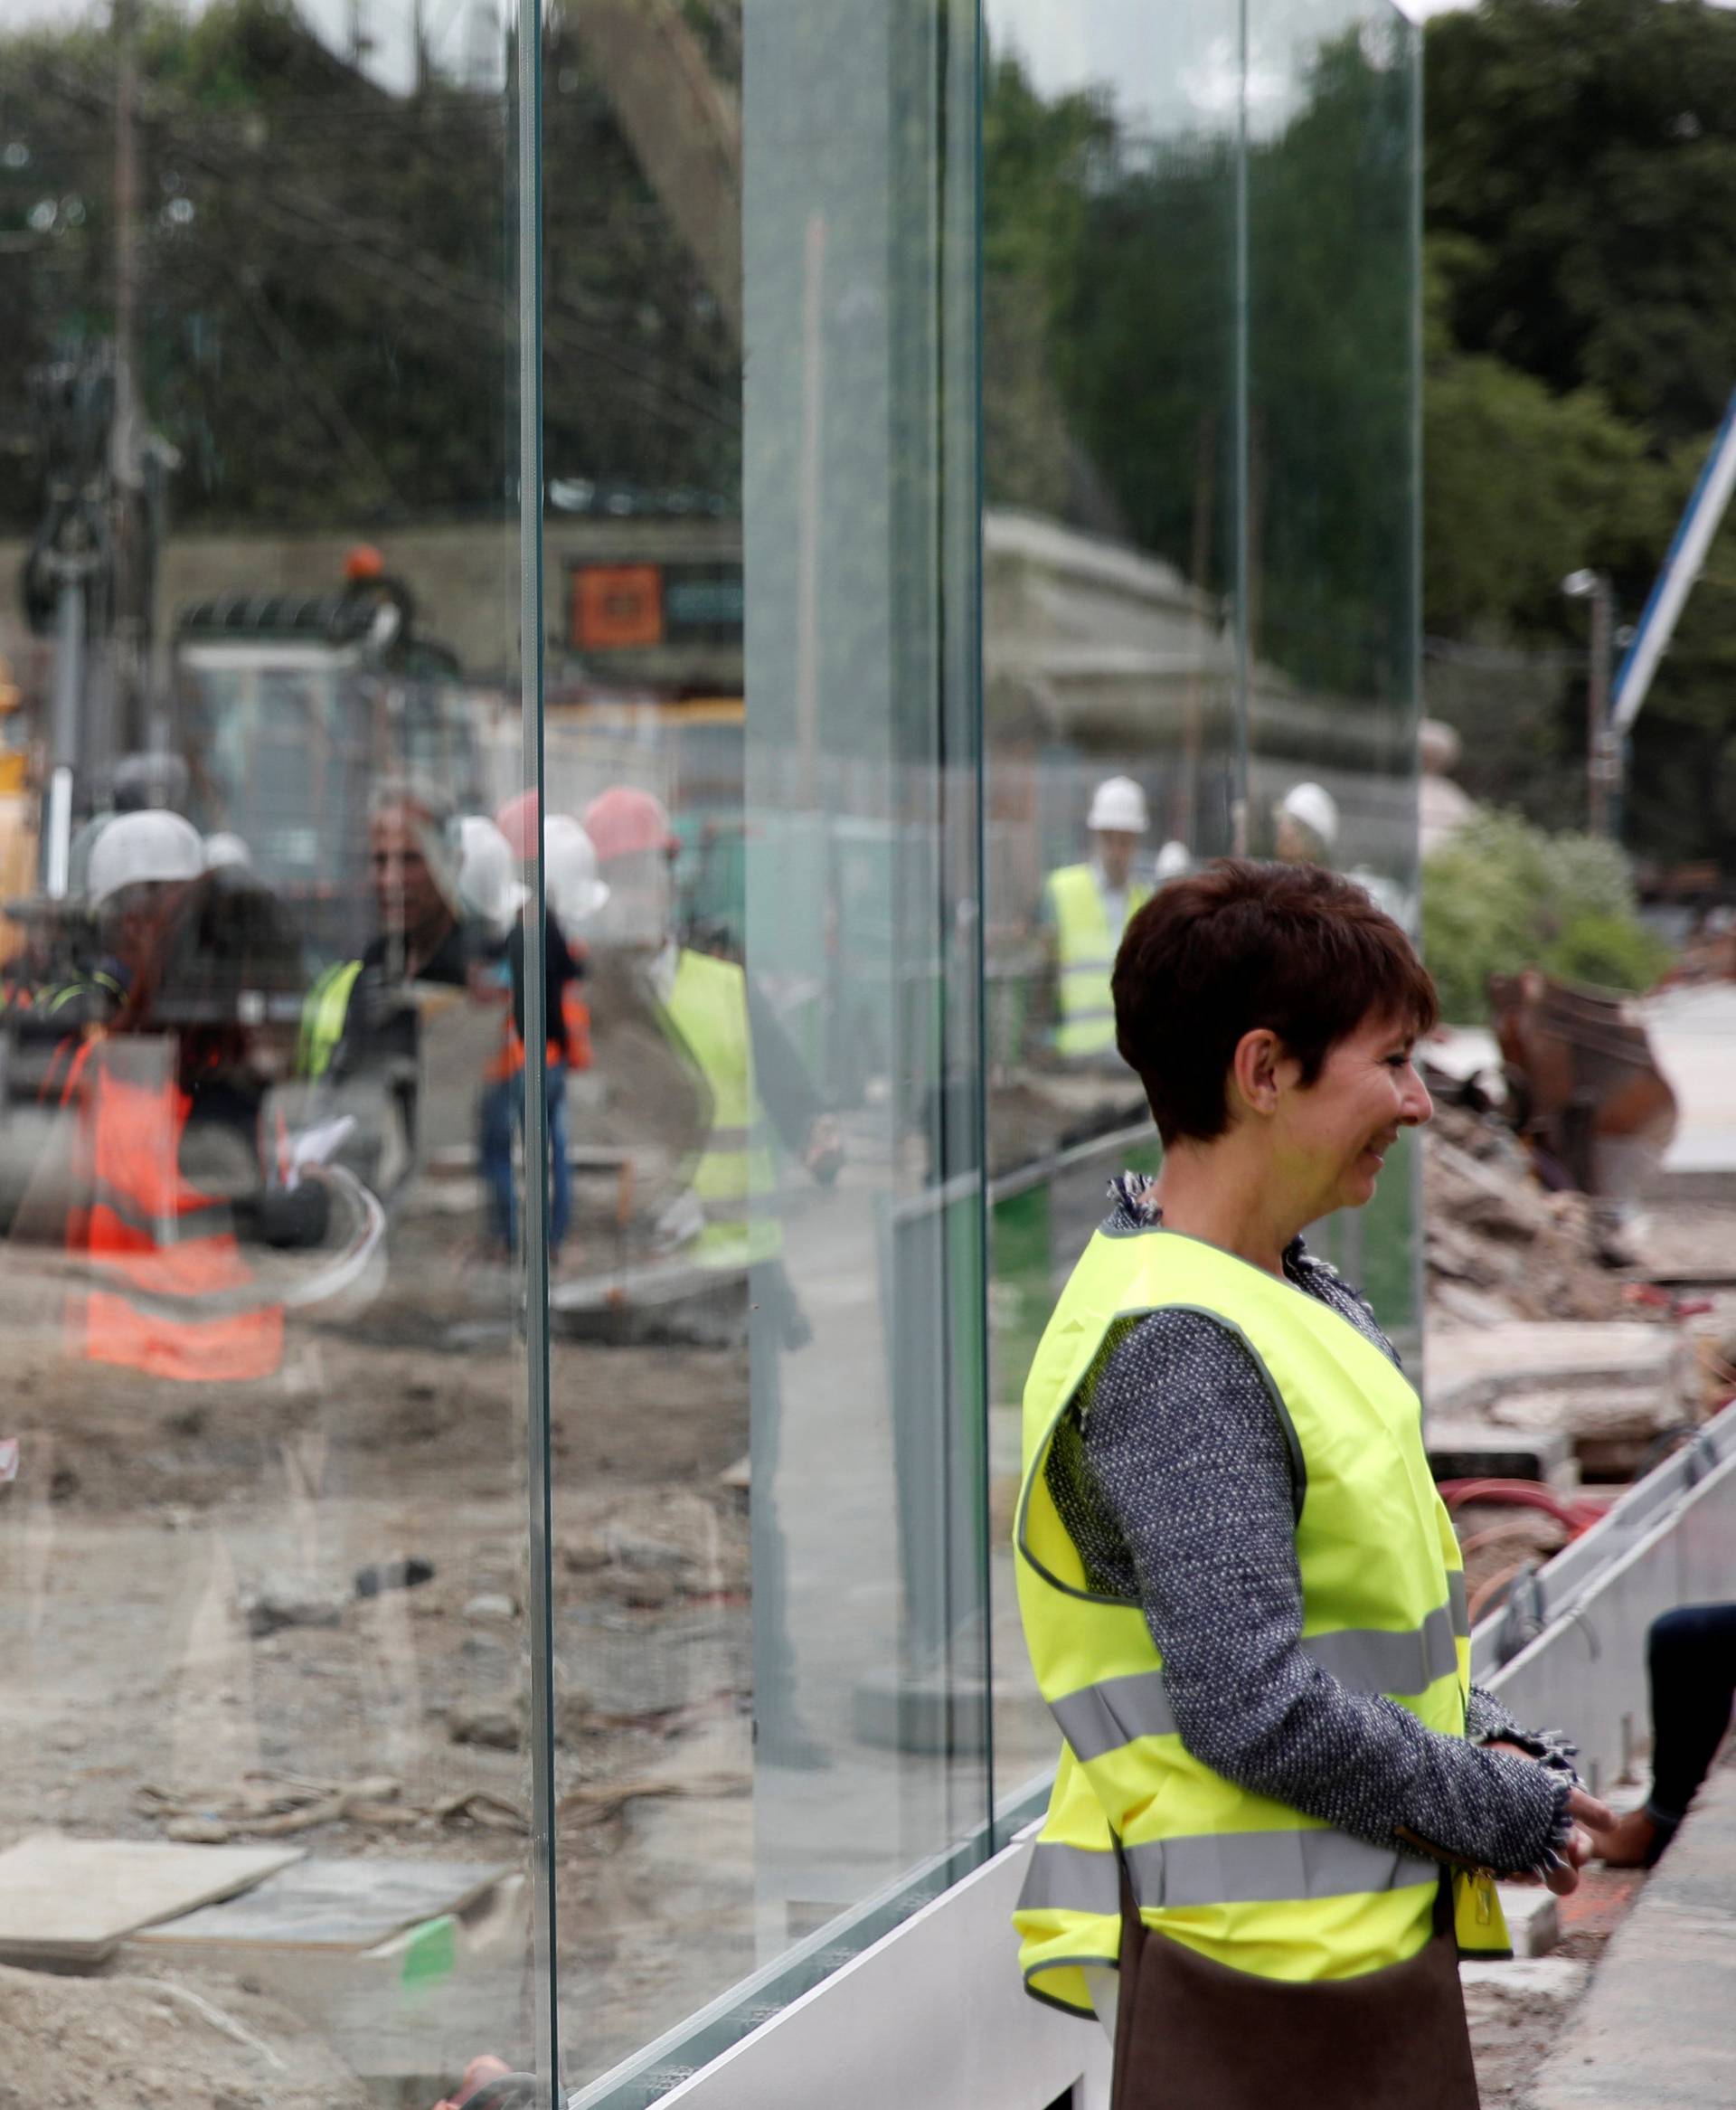 The new glass security fence, that is under construction, is seen around the Eiffel Tower in Paris